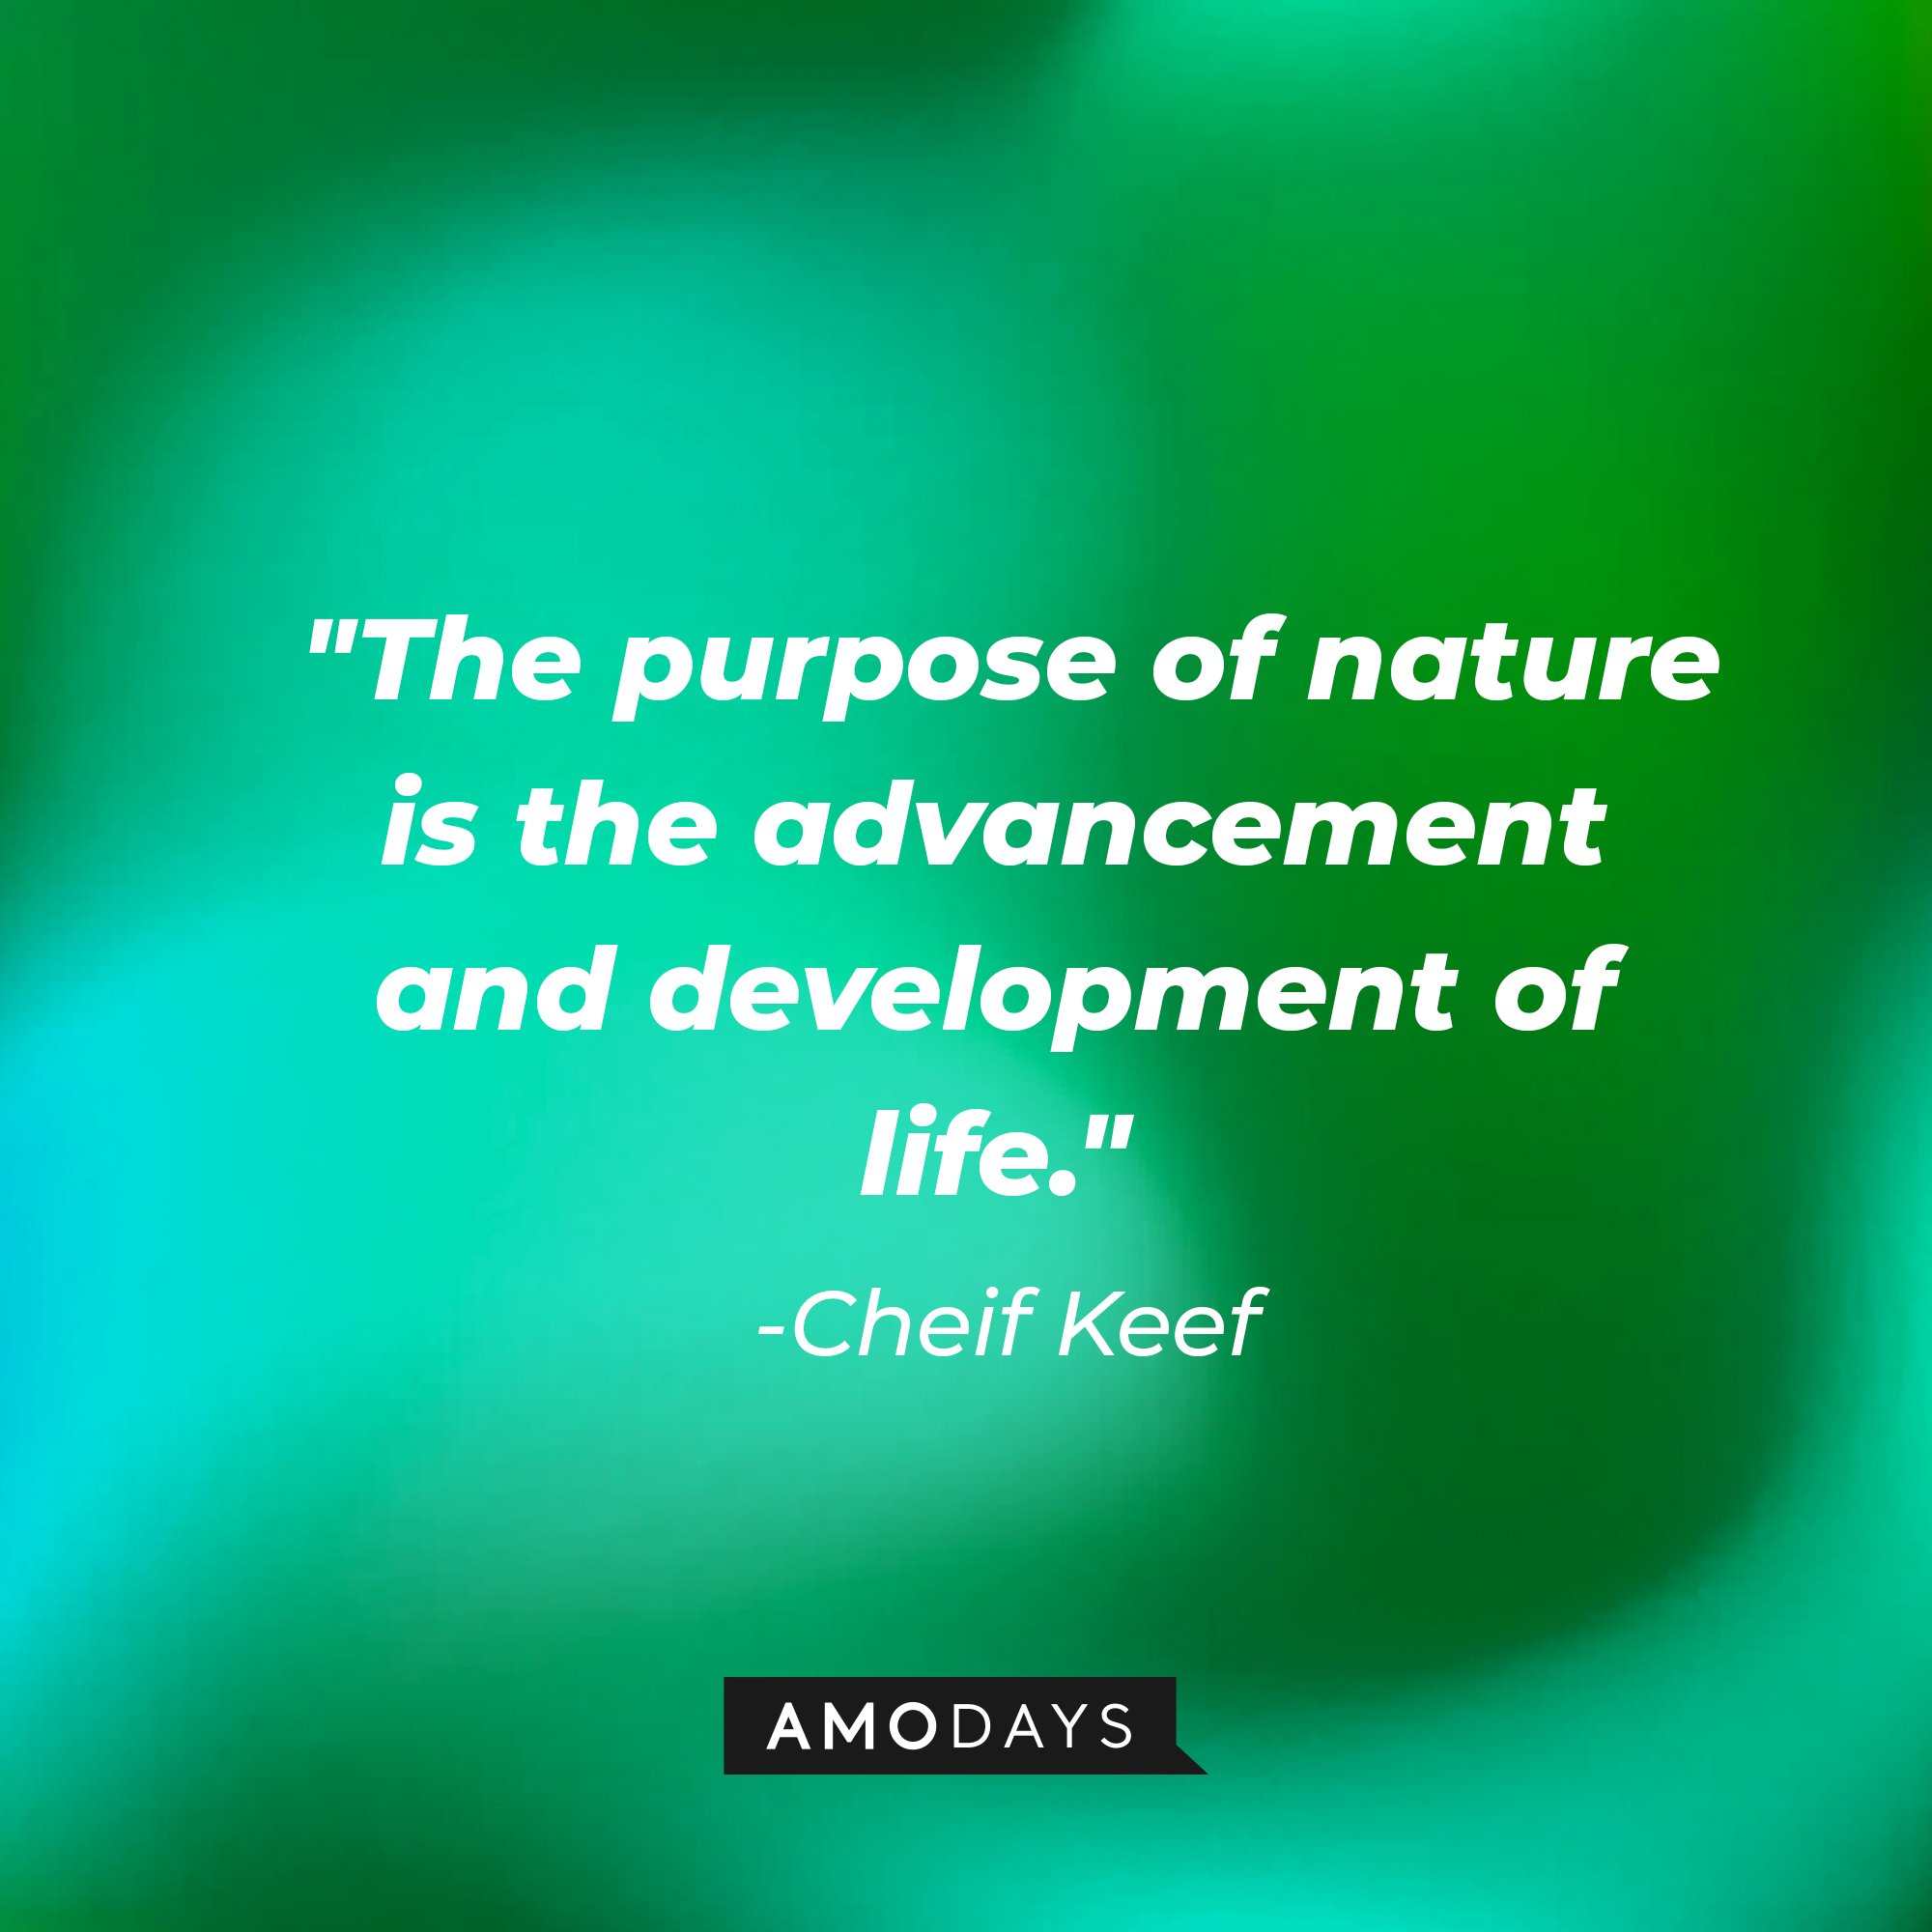  Chief Keef’s quote: "The purpose of nature is the advancement and development of life." | Image: AmoDays  